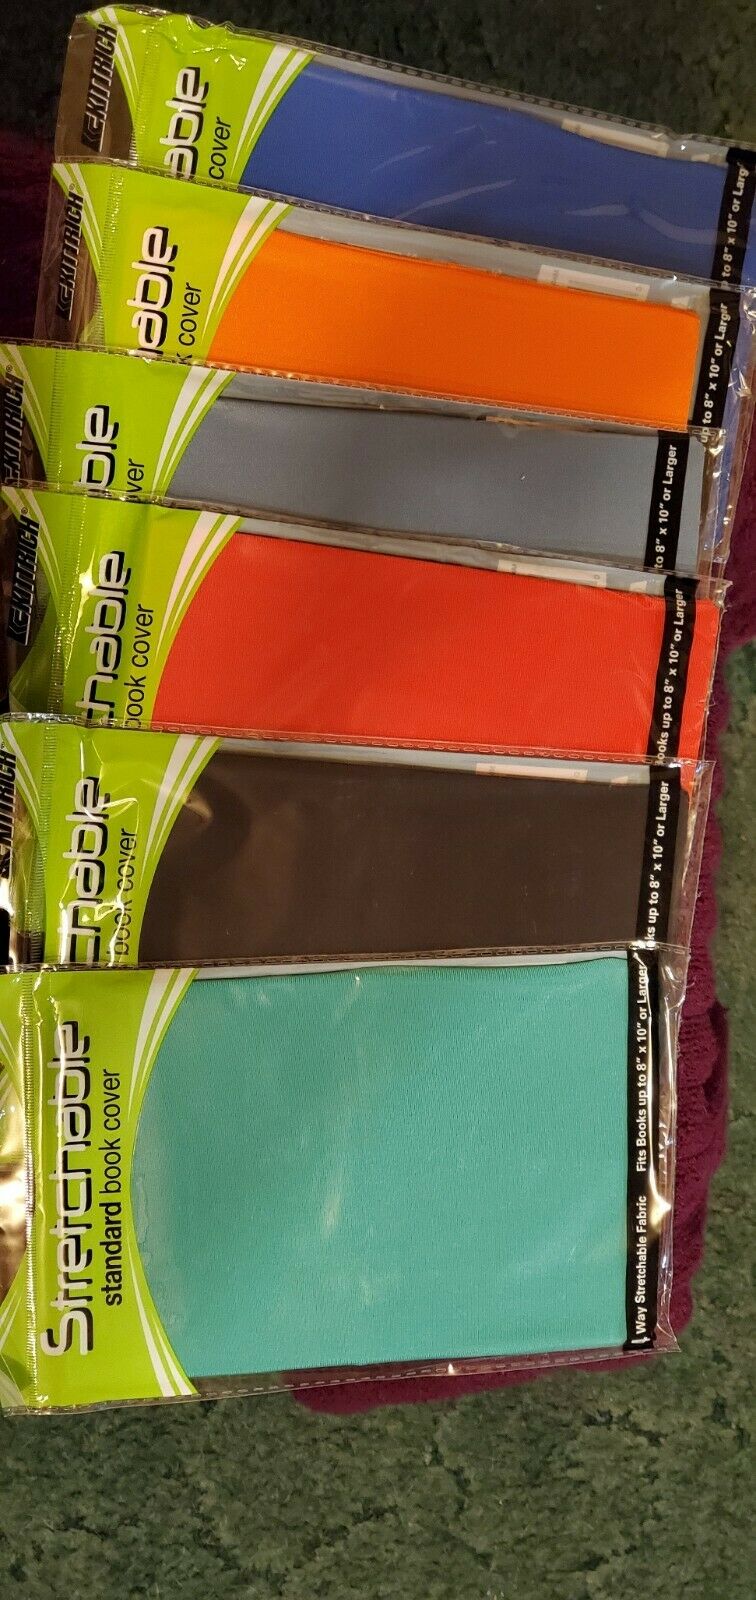 Kittrich Stretchable Book Cover In Assorted Colors